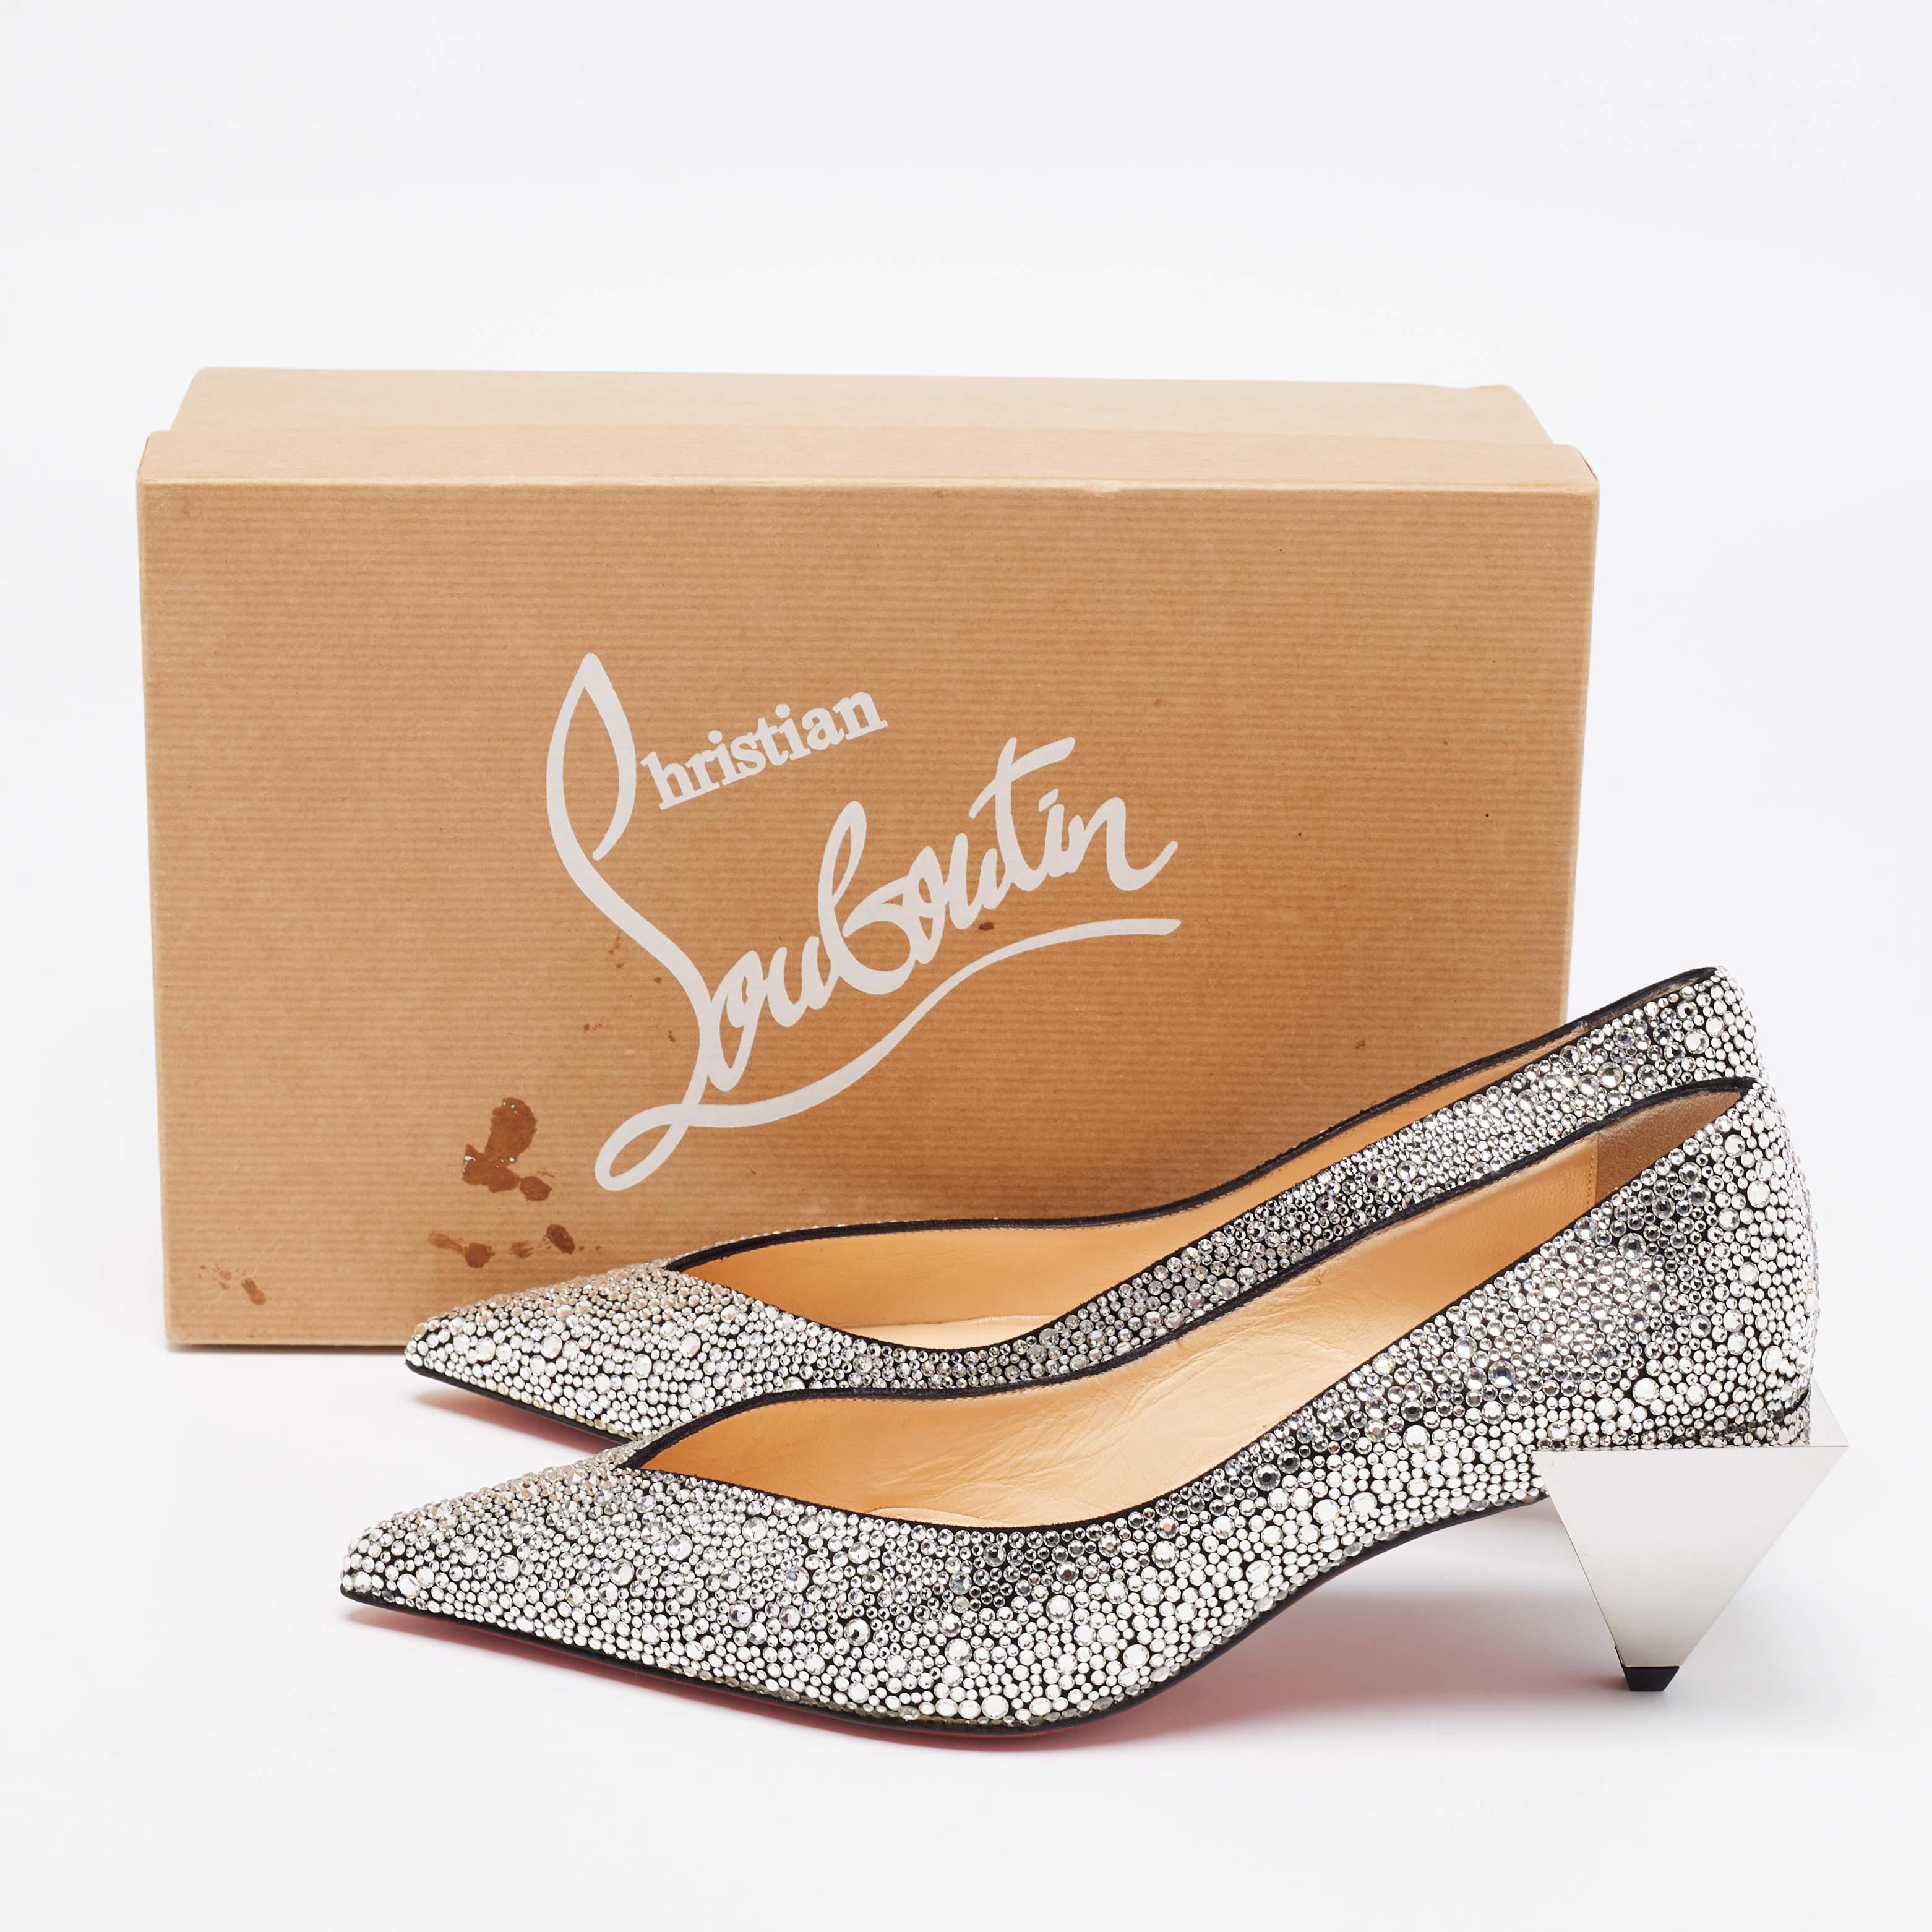 Christian Louboutin Silver Suede Galaxister Strass Pumps Size 37 For Sale 4